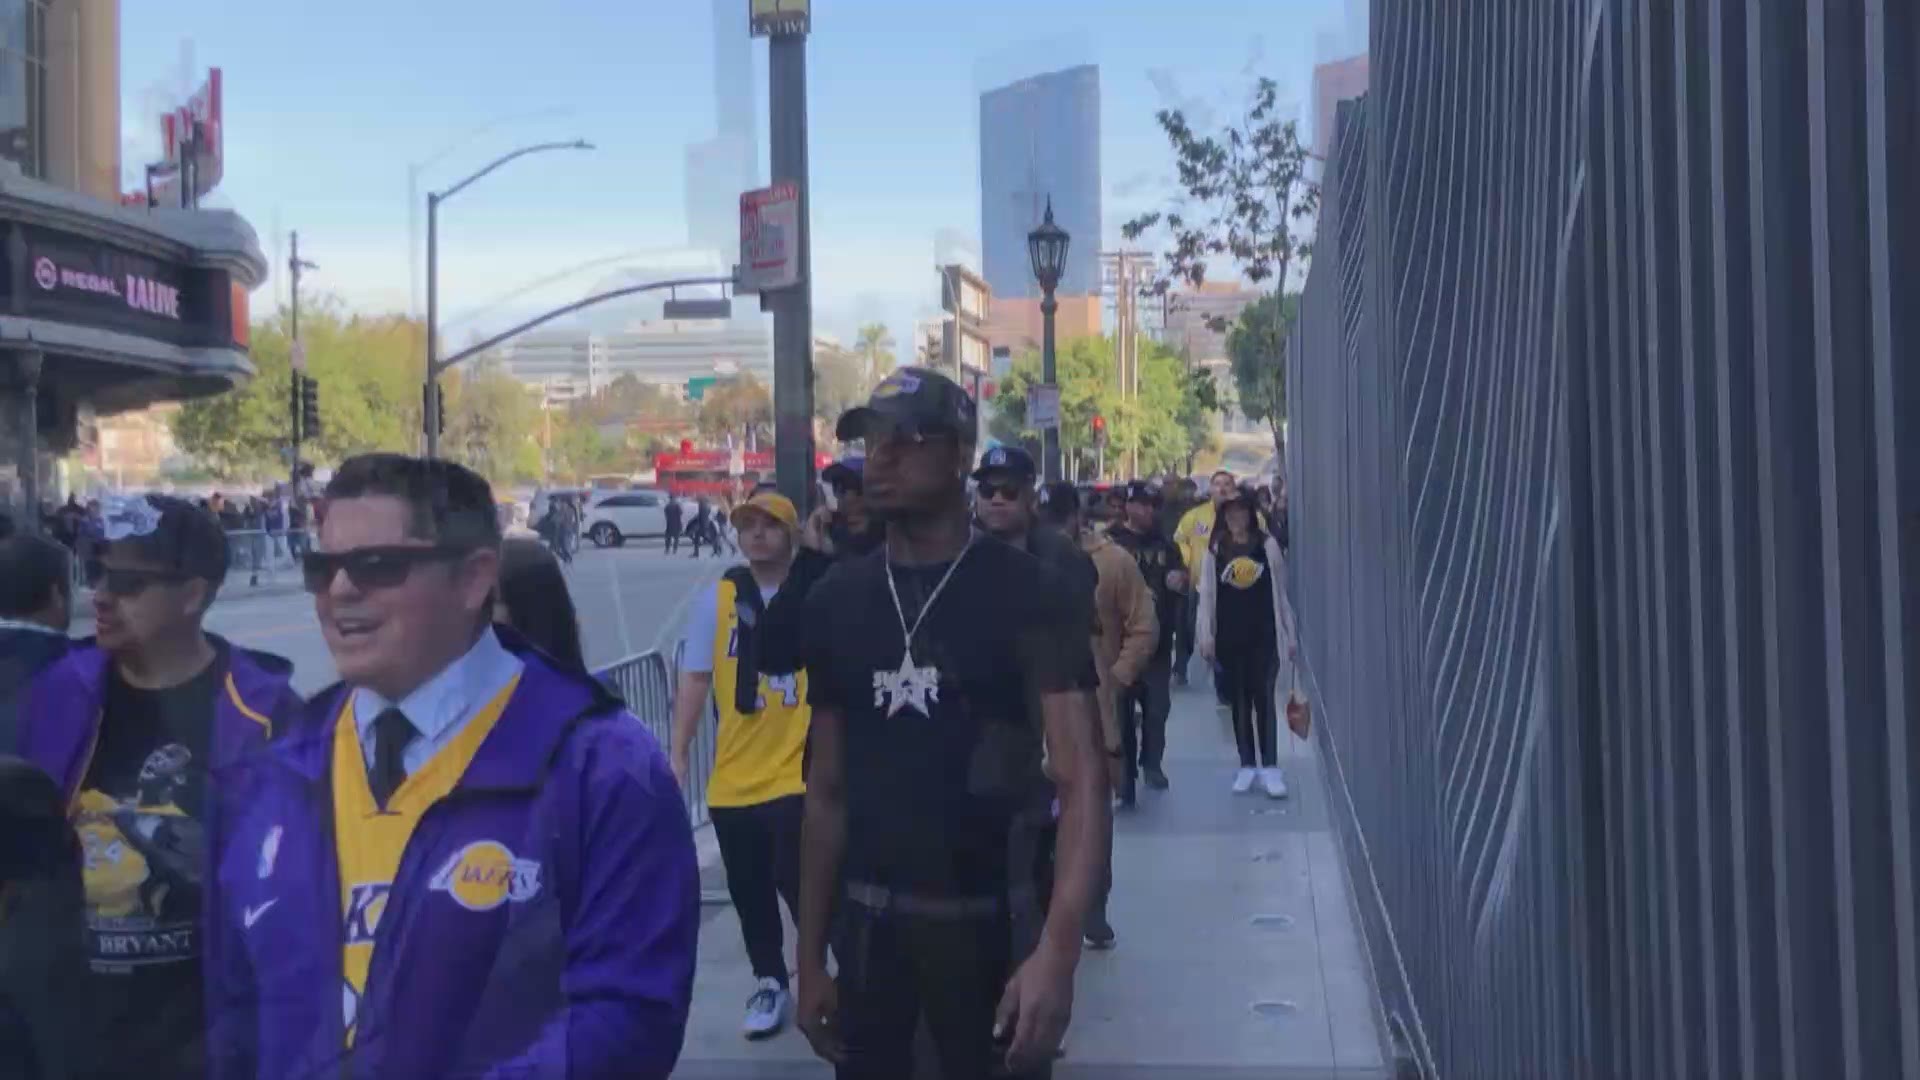 Our News 8 photojournalists captured fans wrapped around the STAPLES Center waiting to pay their respects to Kobe and Gianna Bryant this morning.